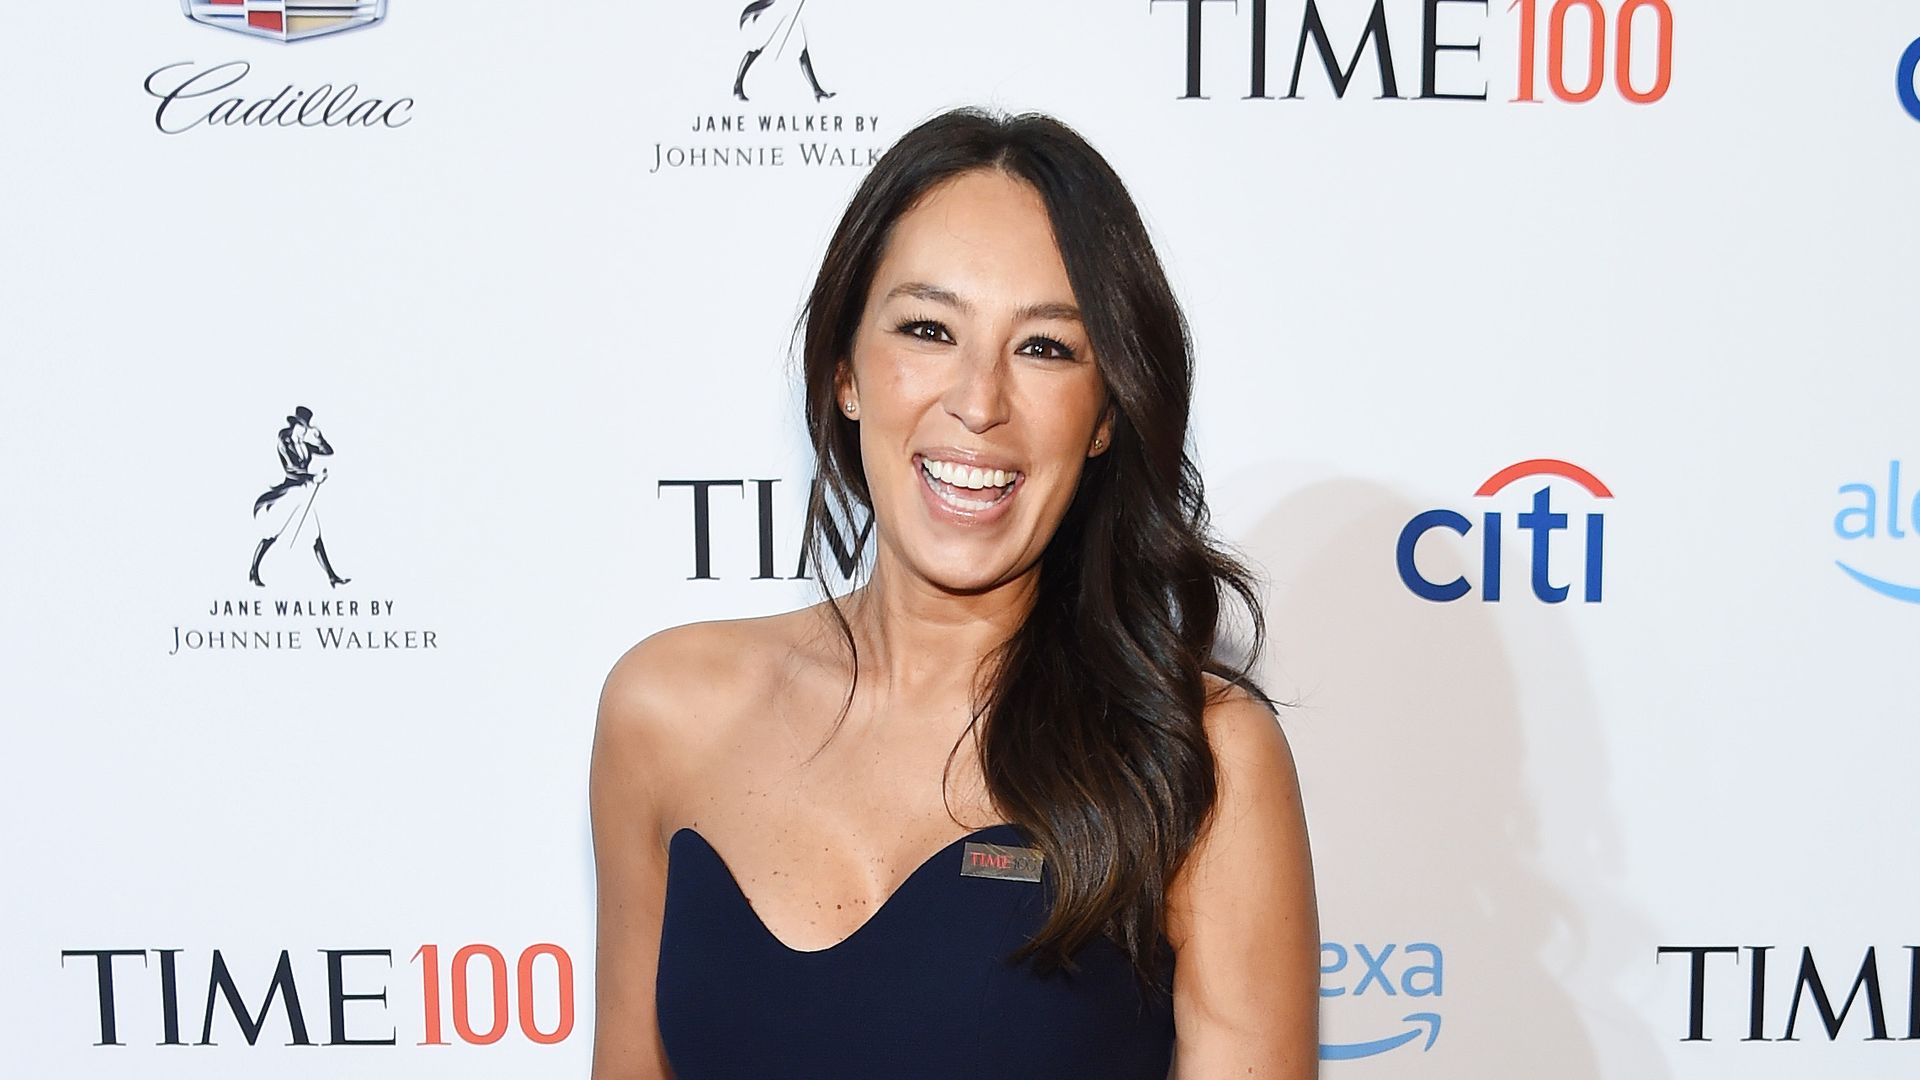 Joanna Gaines attends the TIME 100 Gala 2019 Cocktails at Jazz at Lincoln Center on April 23, 2019 in New York City